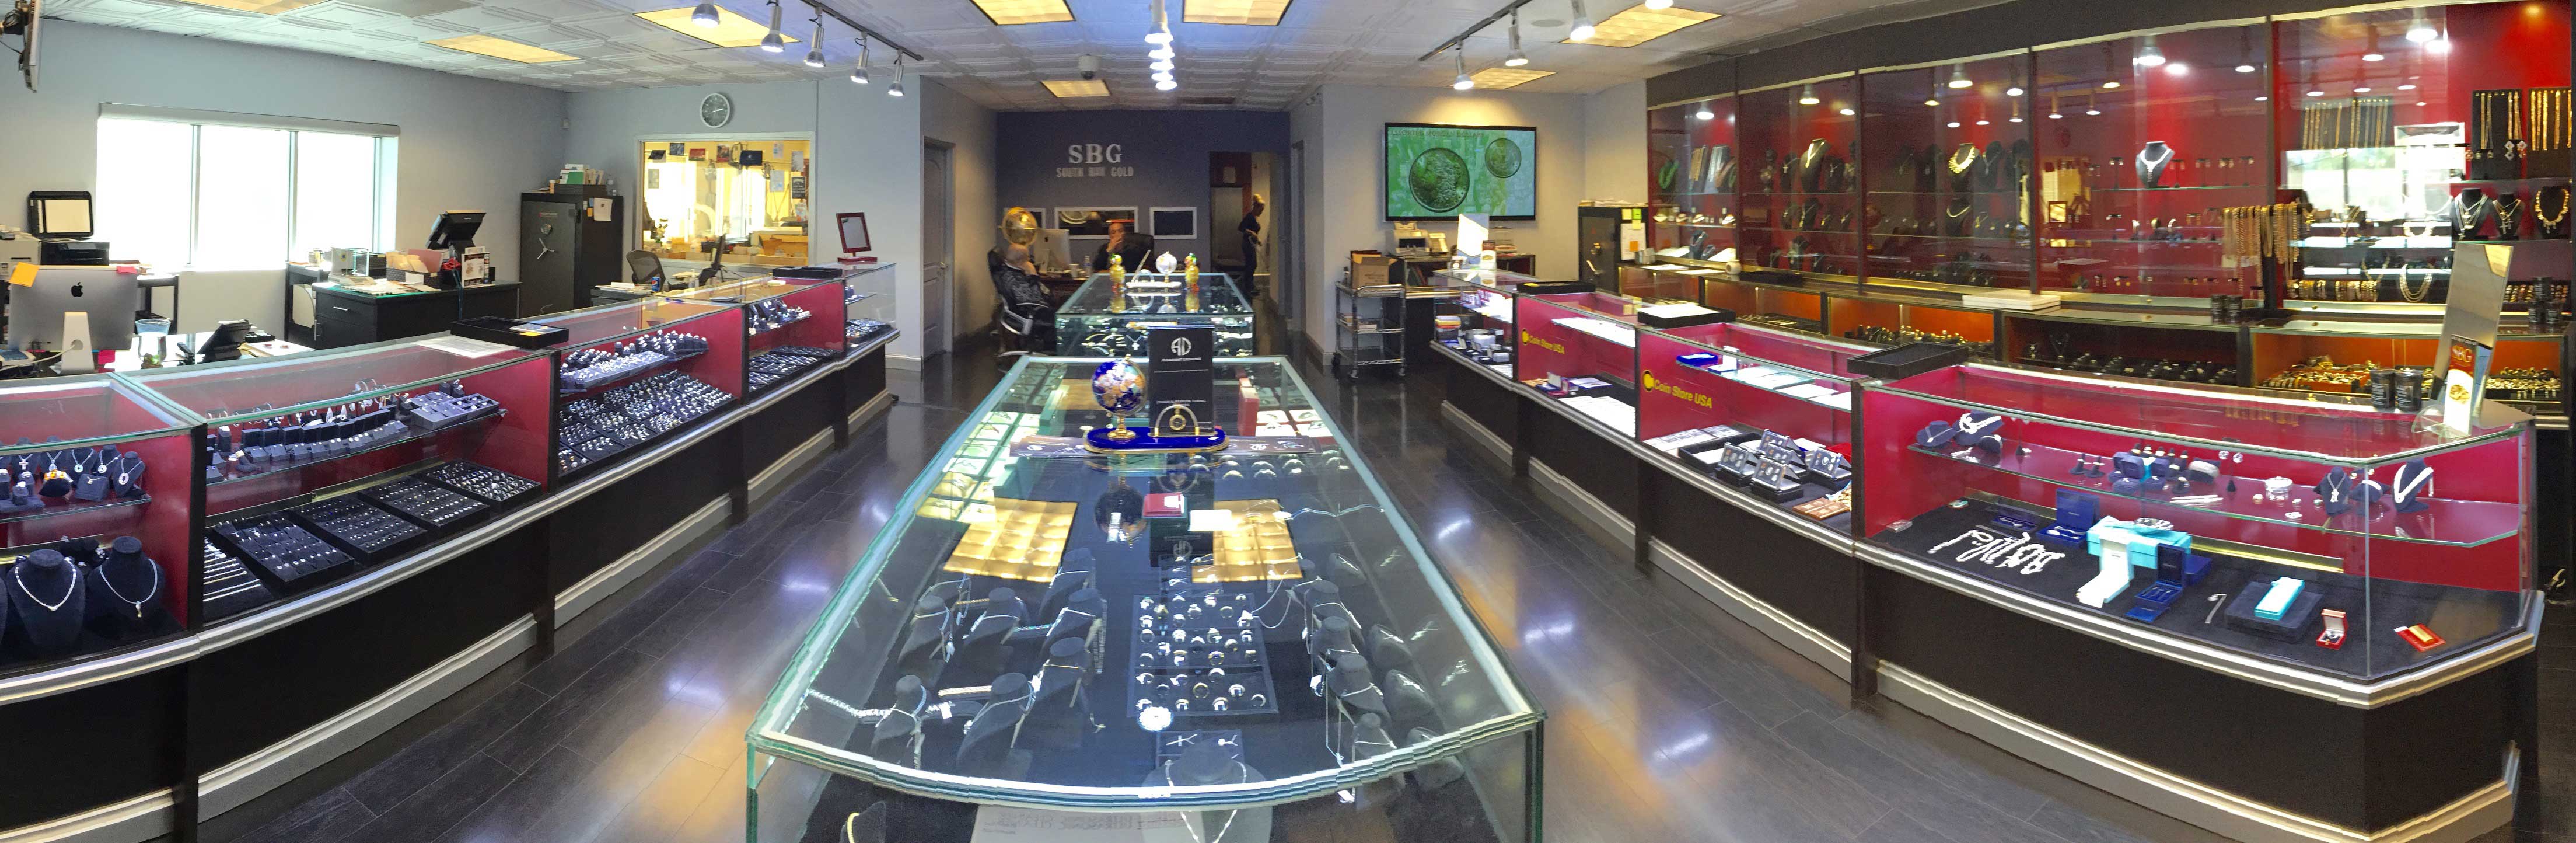 South Bay Gold Jewelry Store at Torrance